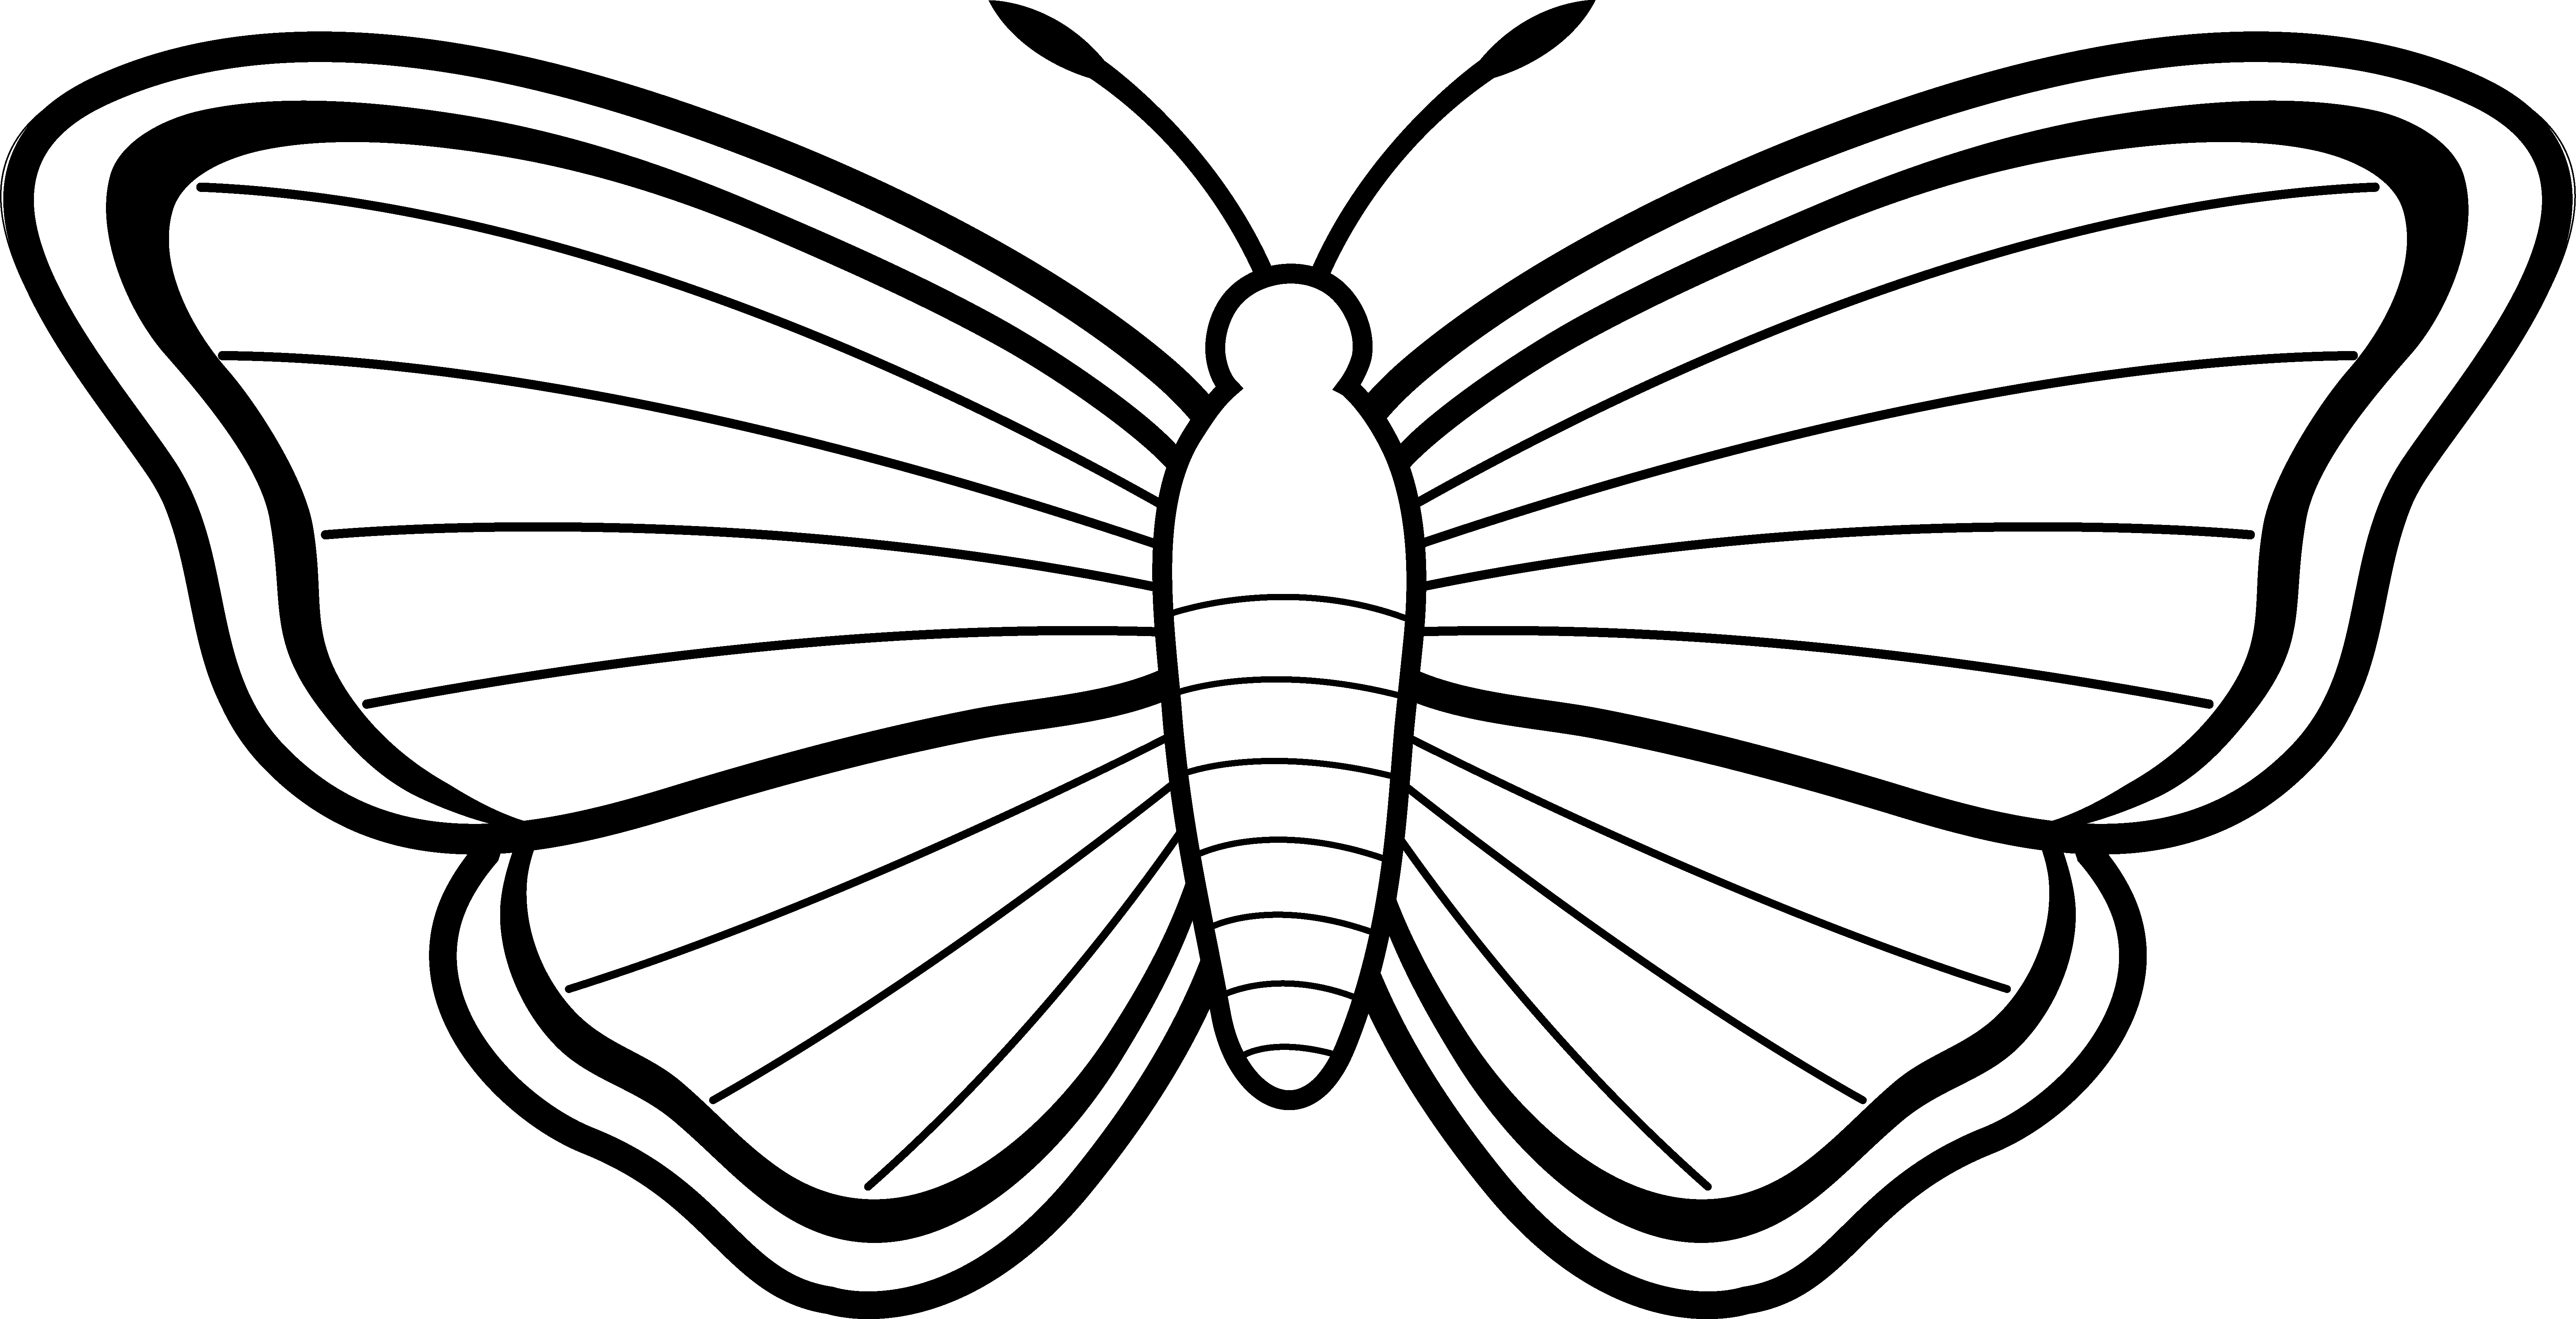 Free butterfly clipart black and white - ClipartFox